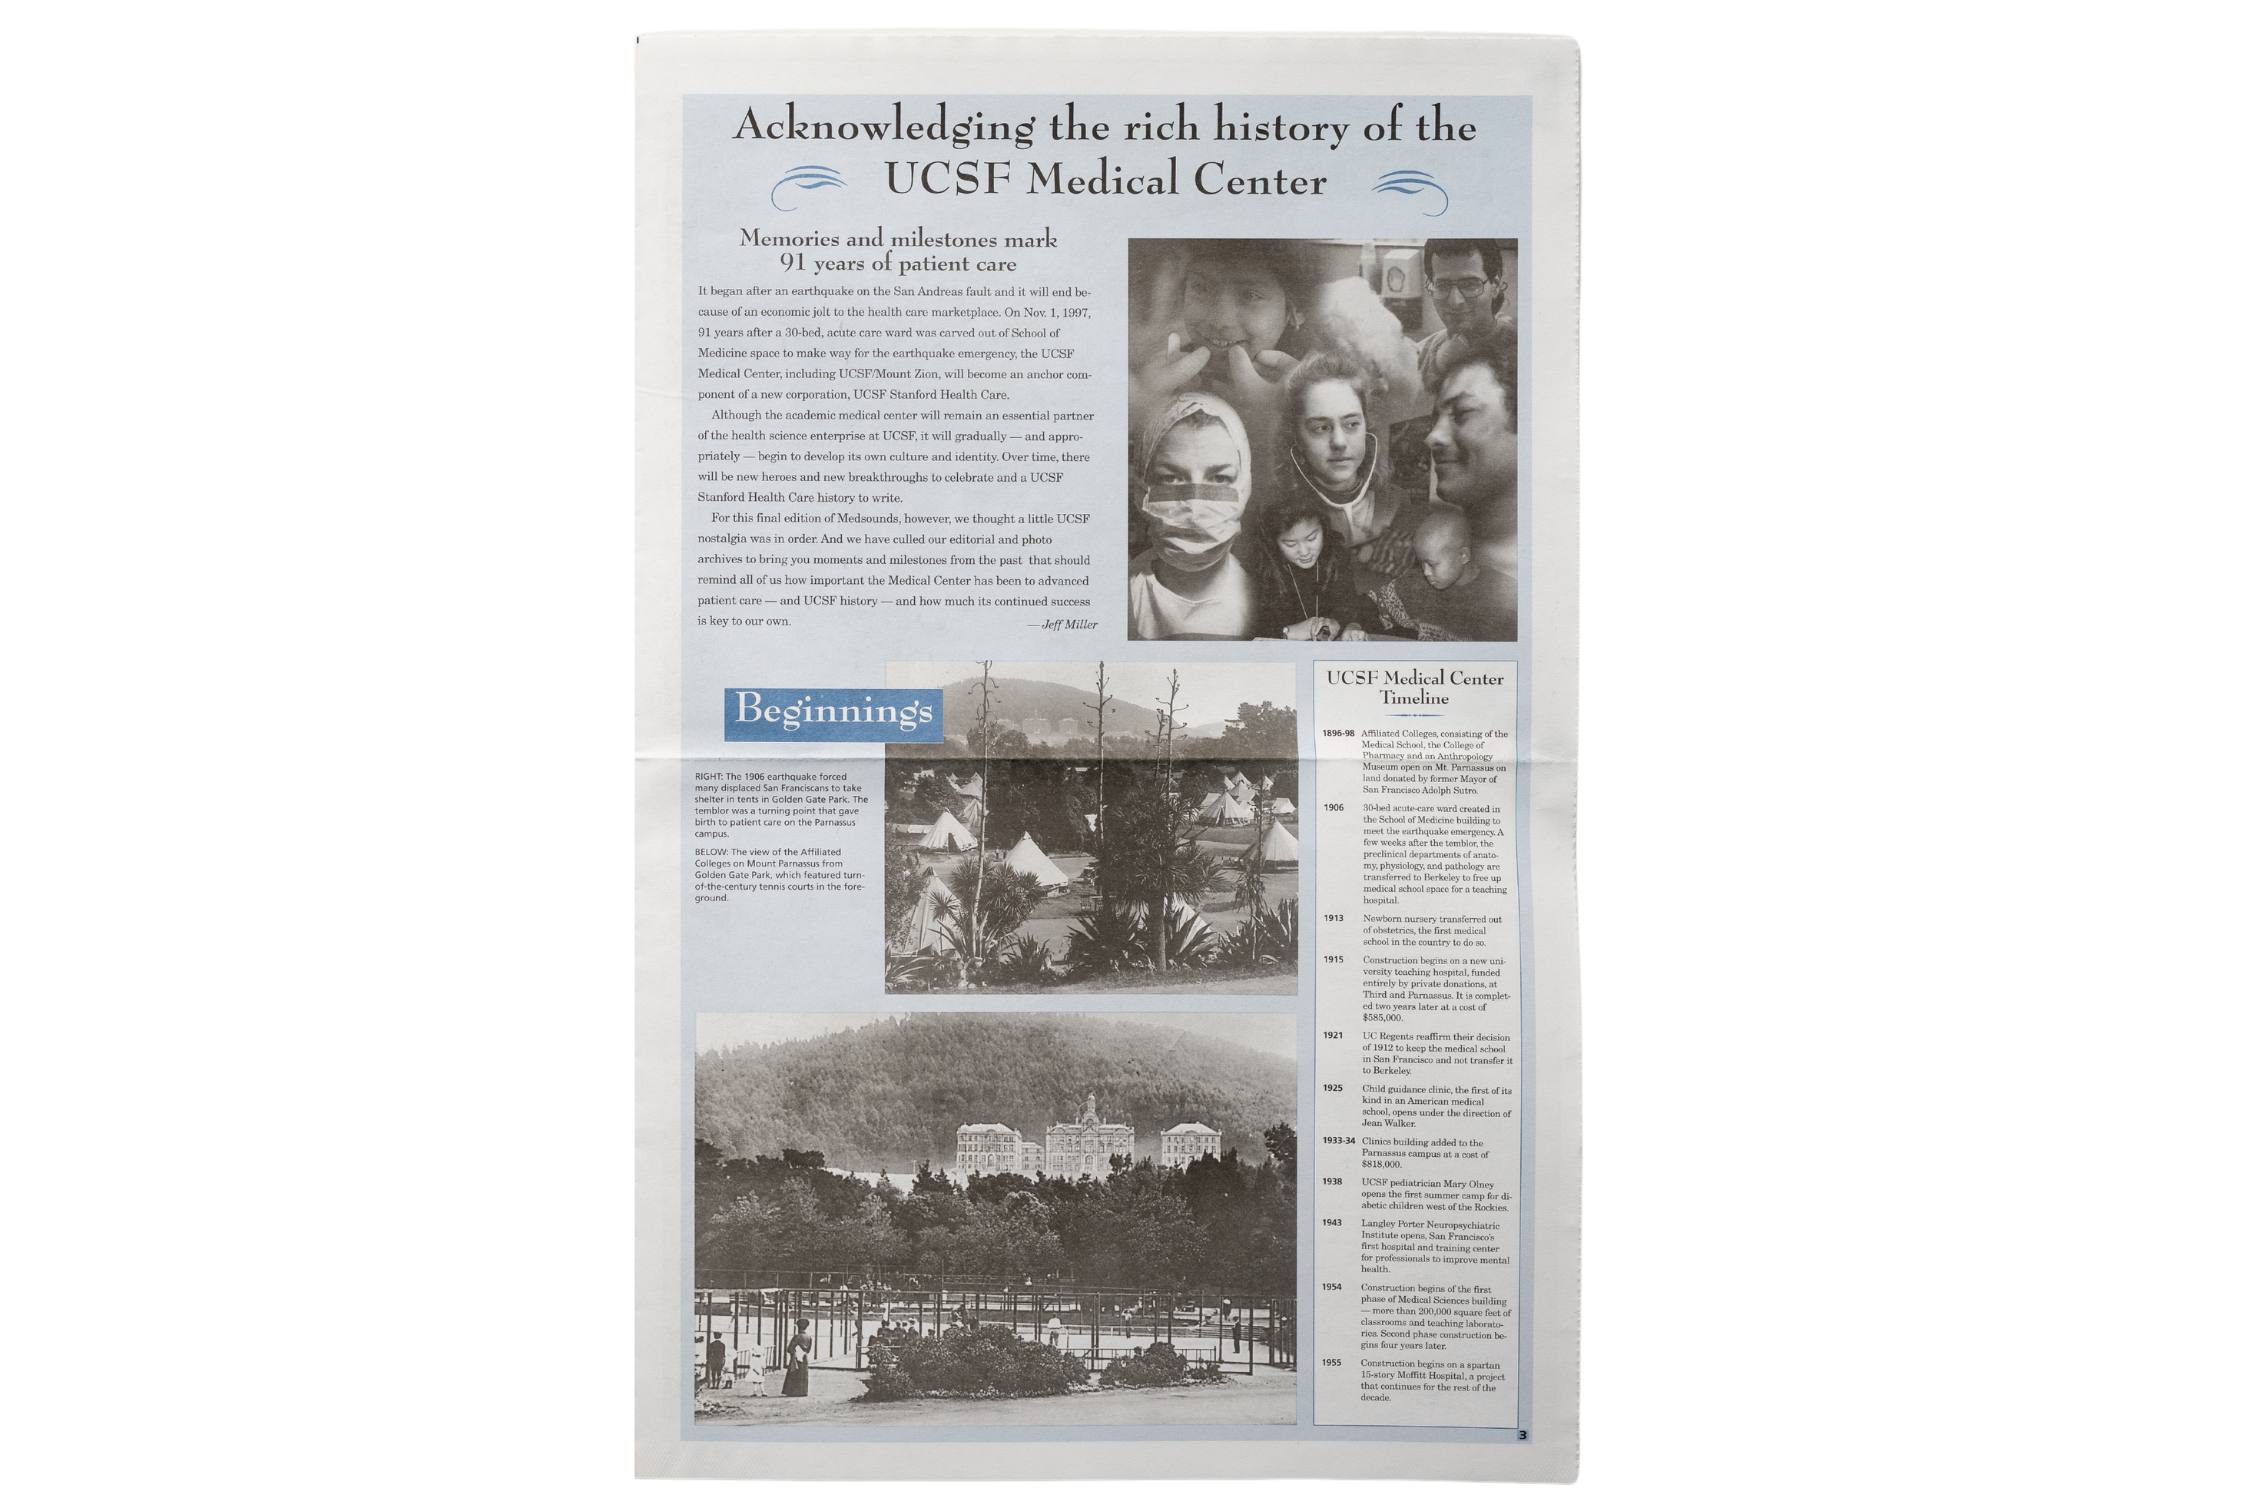 blue Newsbreak newspaper with a timeline and headline that reads "Acknowledging the UCSF Medical Center History"